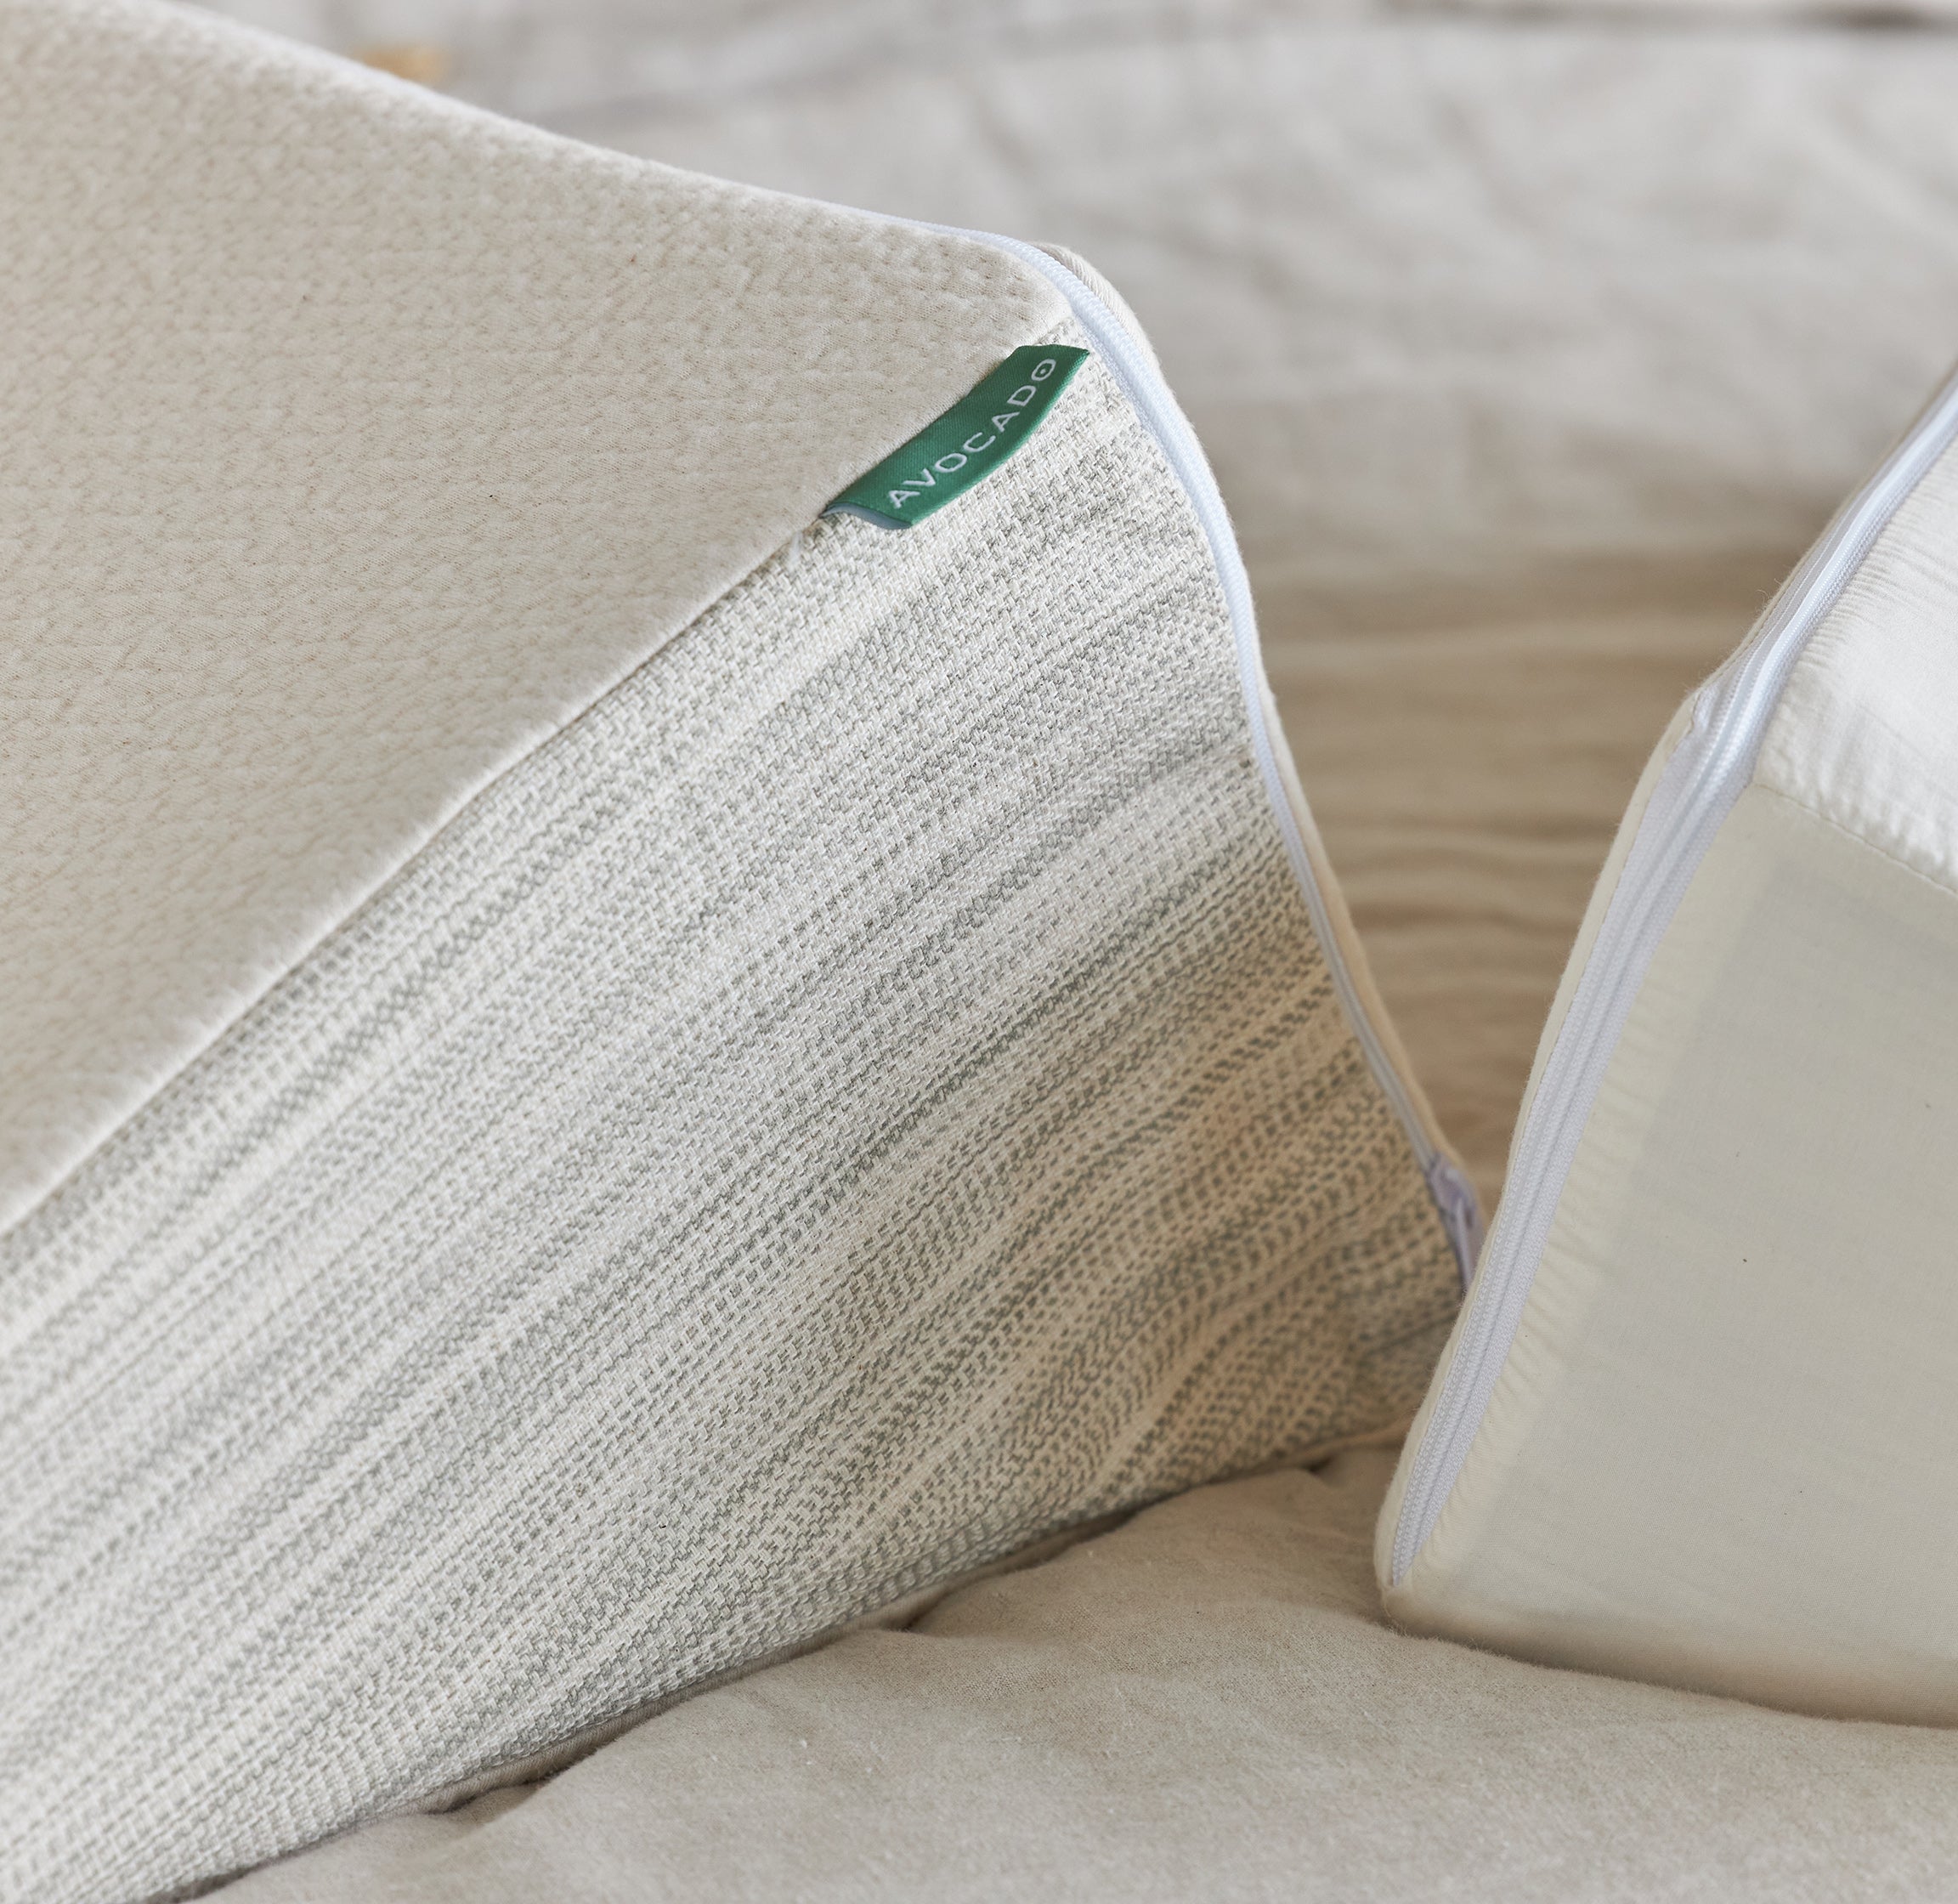 Synthetic Fill Specialty Wedge Pillow